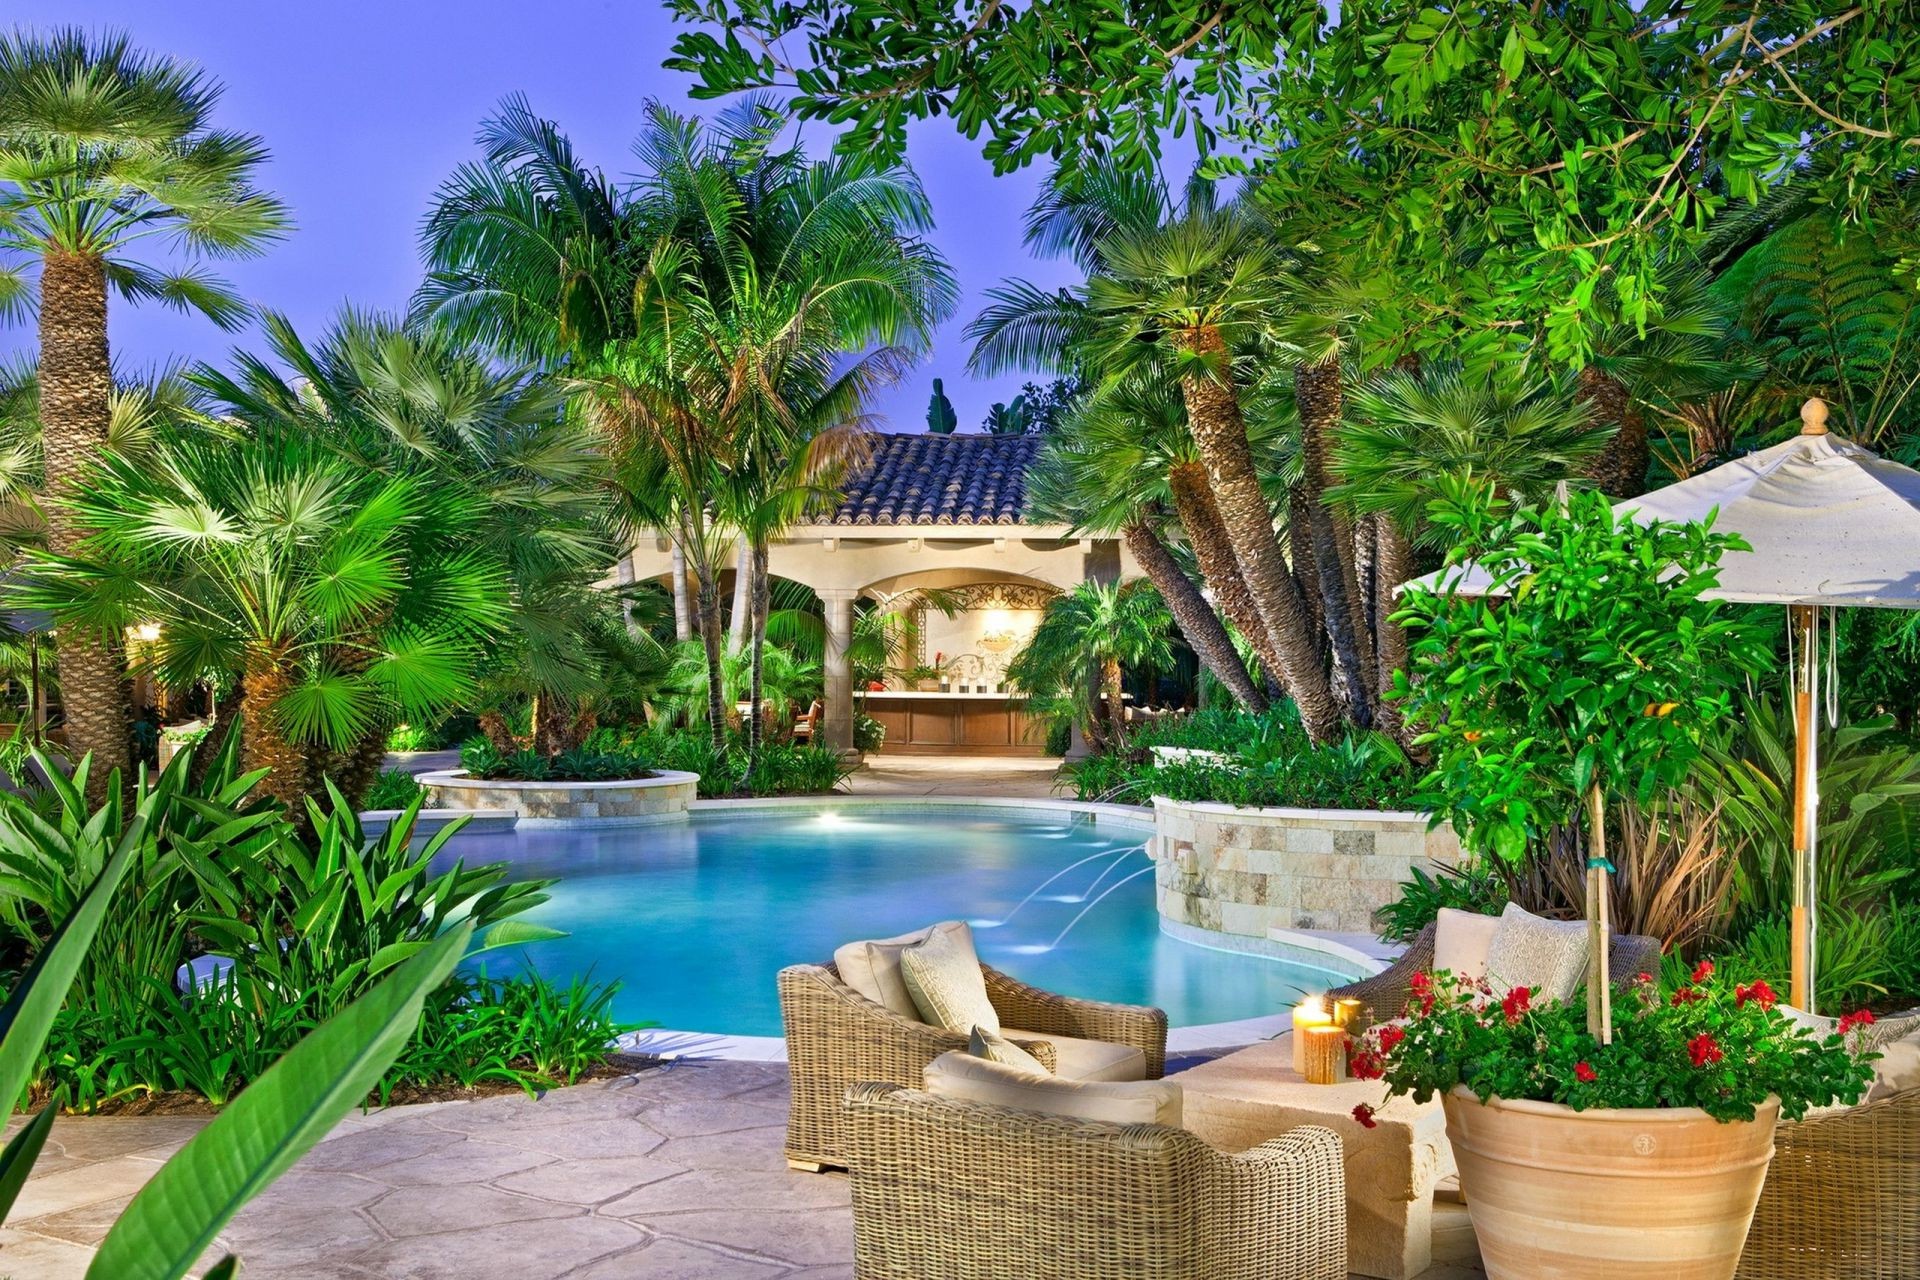 famous places pool hotel resort tropical patio palm garden summer poolside luxury swimming pool chair swimming exotic vacation tree travel paradise sofa